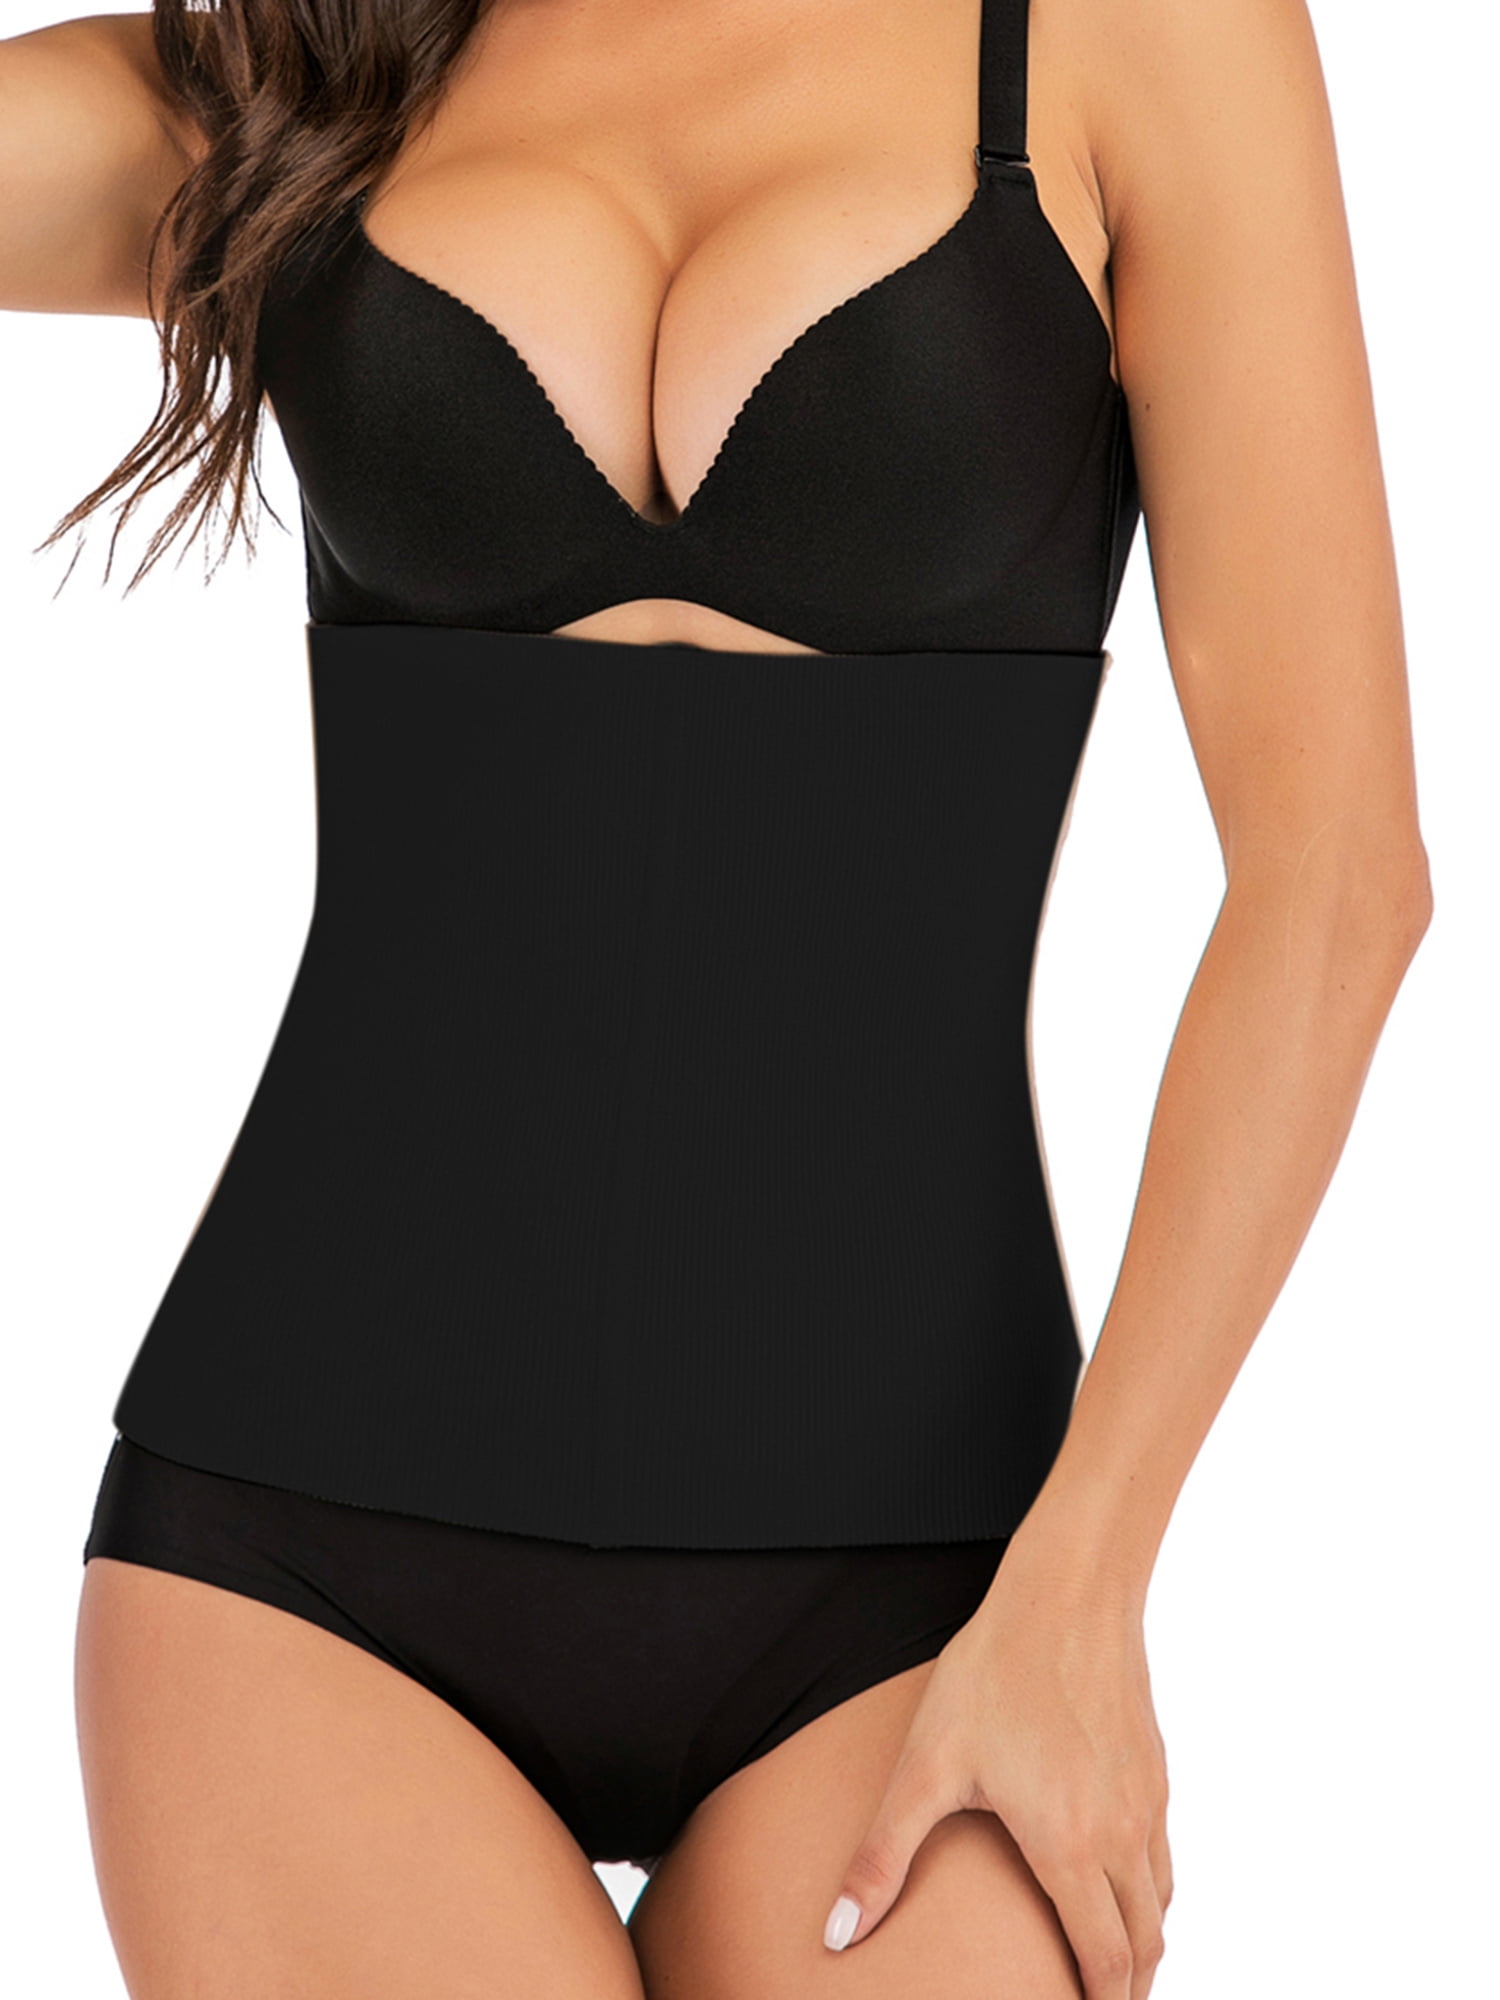 Details about   Womens Full Body Shaper Plus Size Shapewear Waist Trainer Cincher Corset Tights 